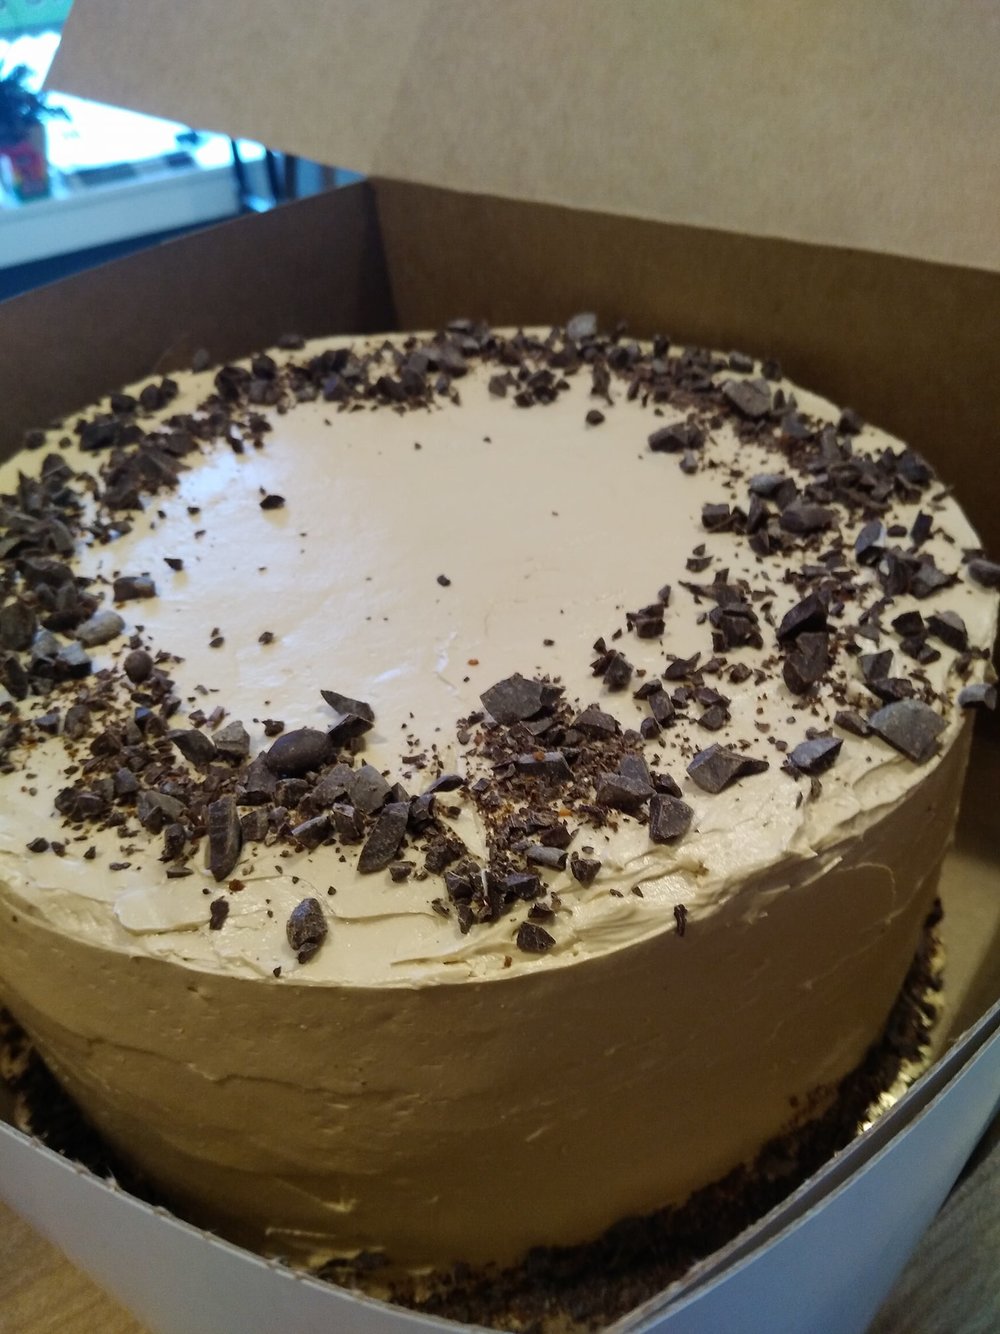 Two 9” layers of chocolate cake flavored with cinnamon and chili. Filled and frosted with coffee buttercream. Portland Maine